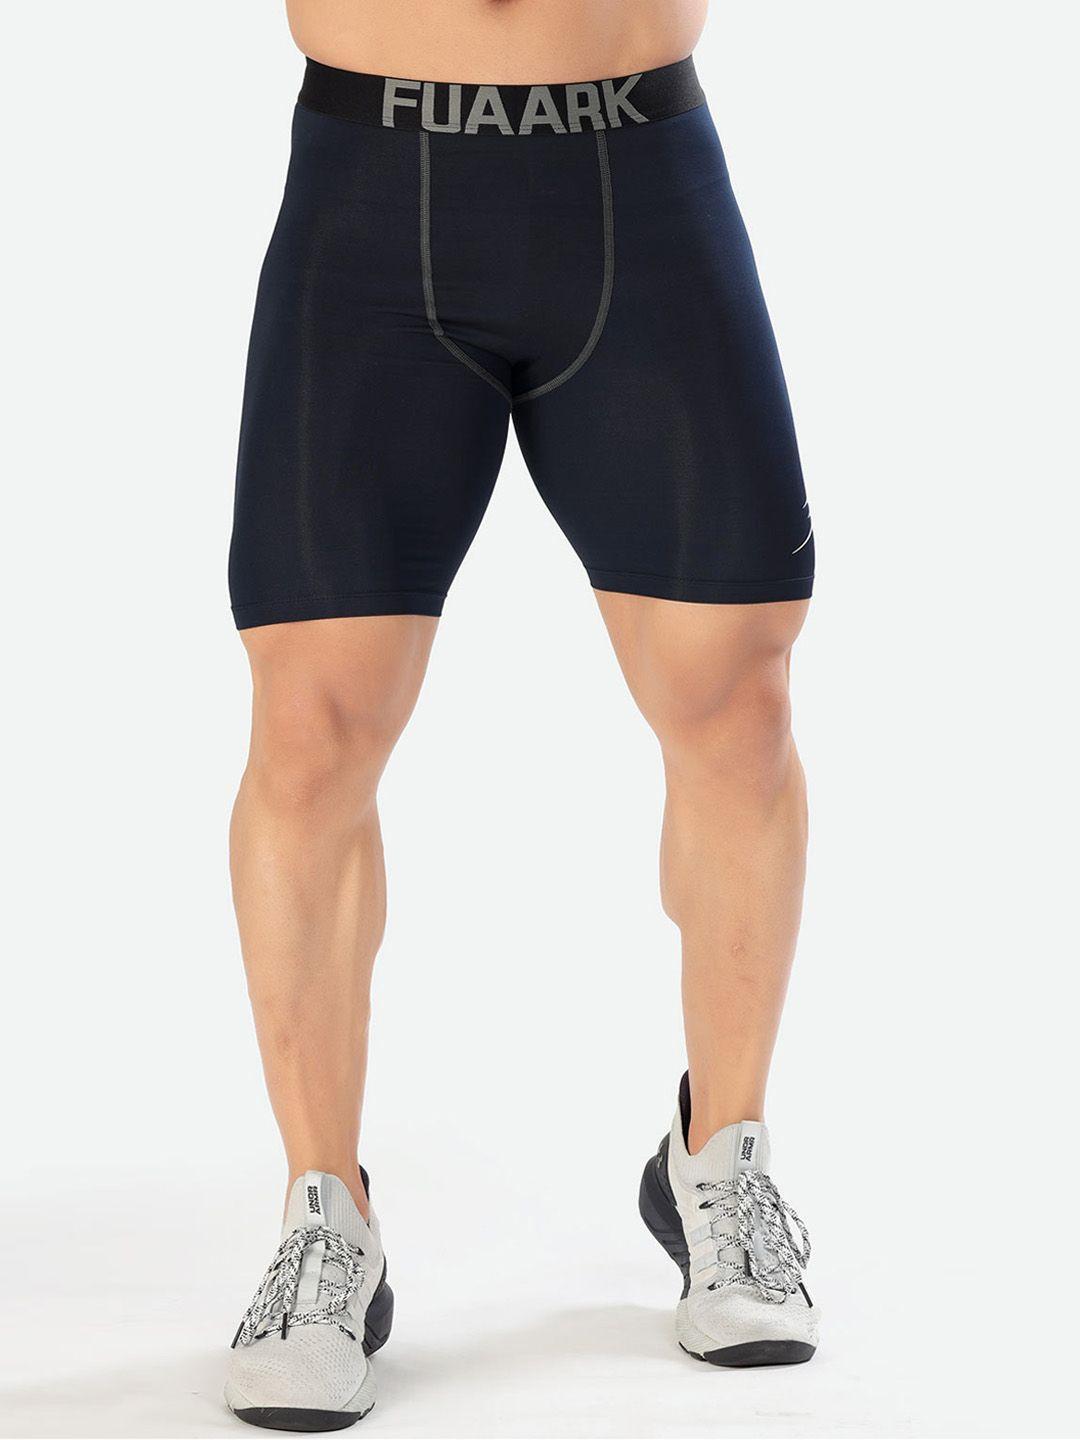 fuaark men navy blue skinny fit high-rise training or gym sports shorts with antimicrobial technology